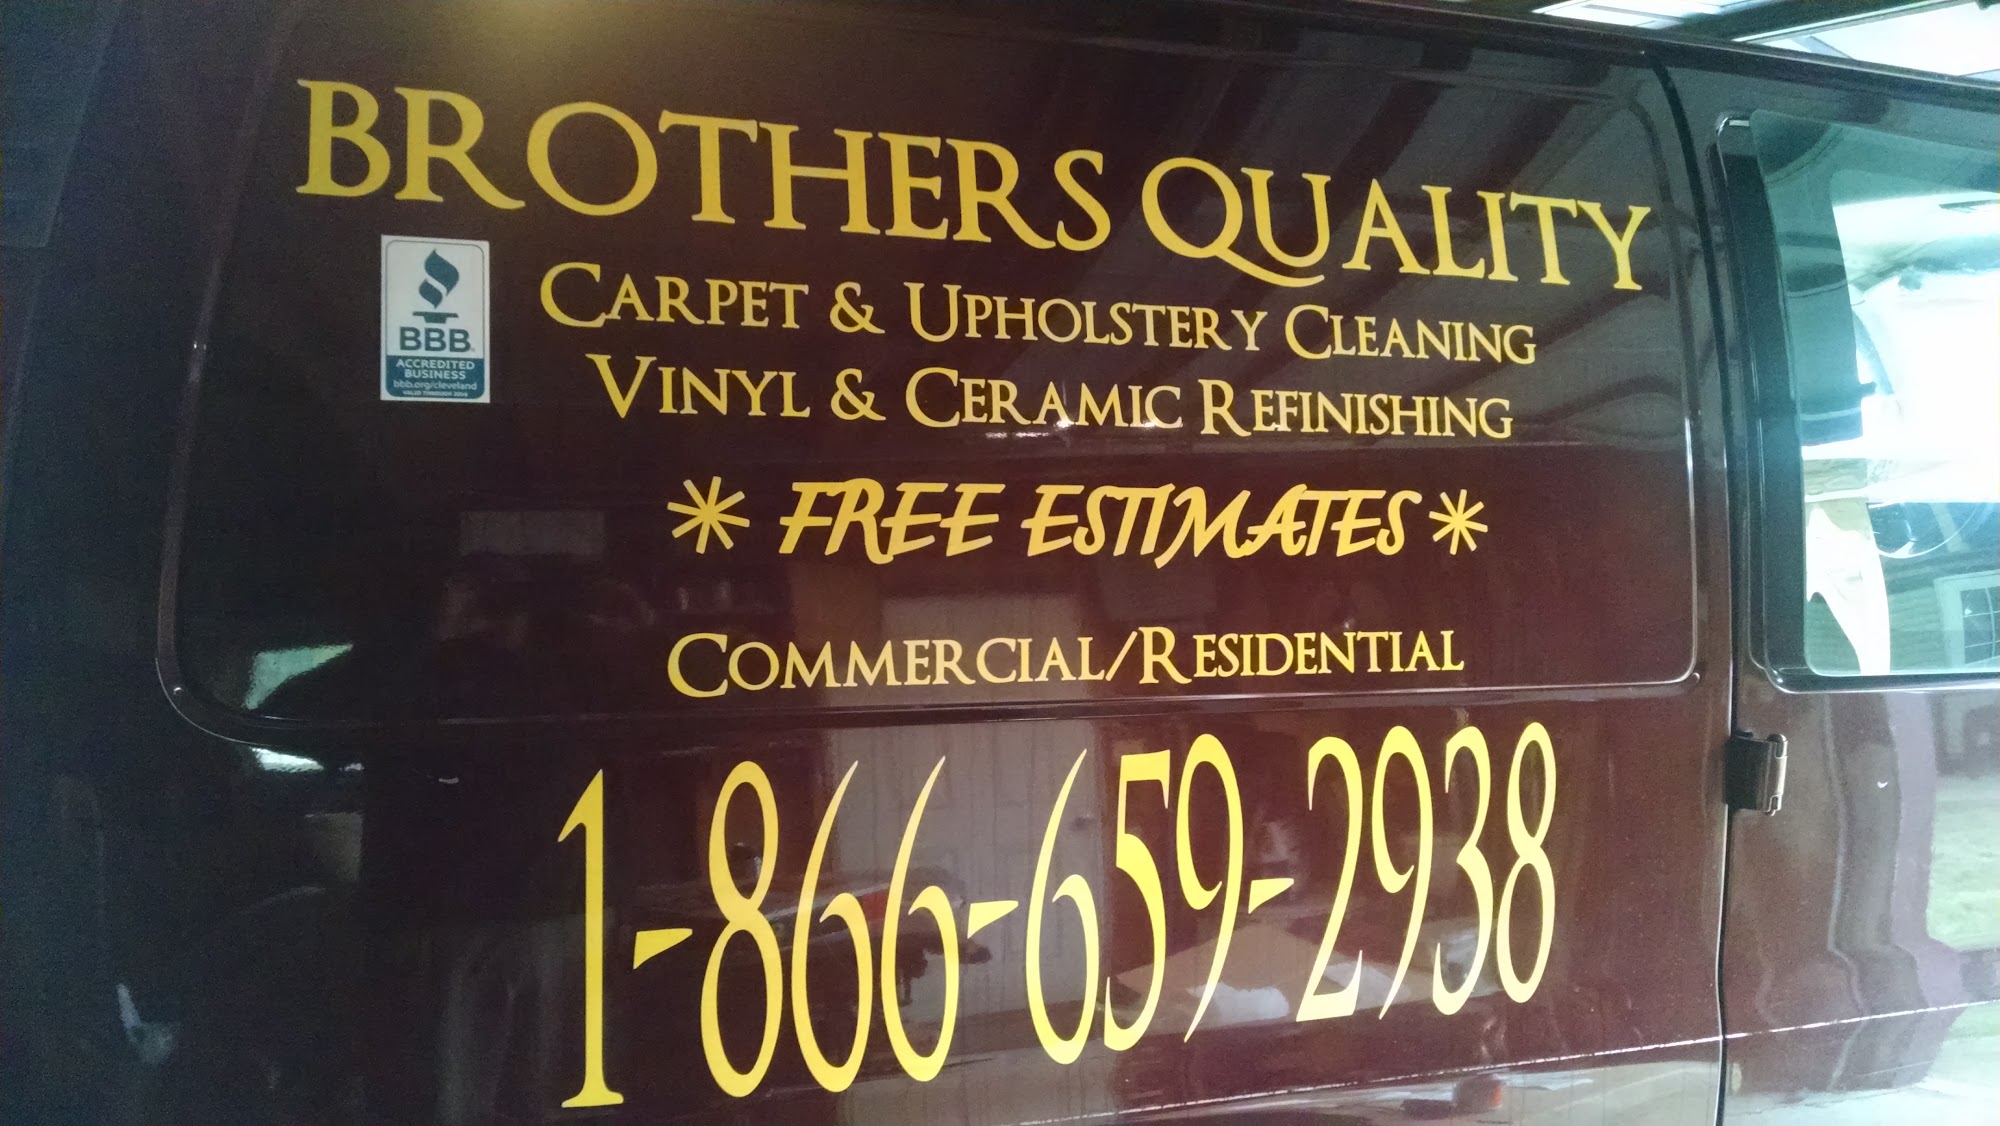 Brothers Quality Carpet & Upholstery Cleaning 1030 s Helendale st., Port Clinton Ohio 43452